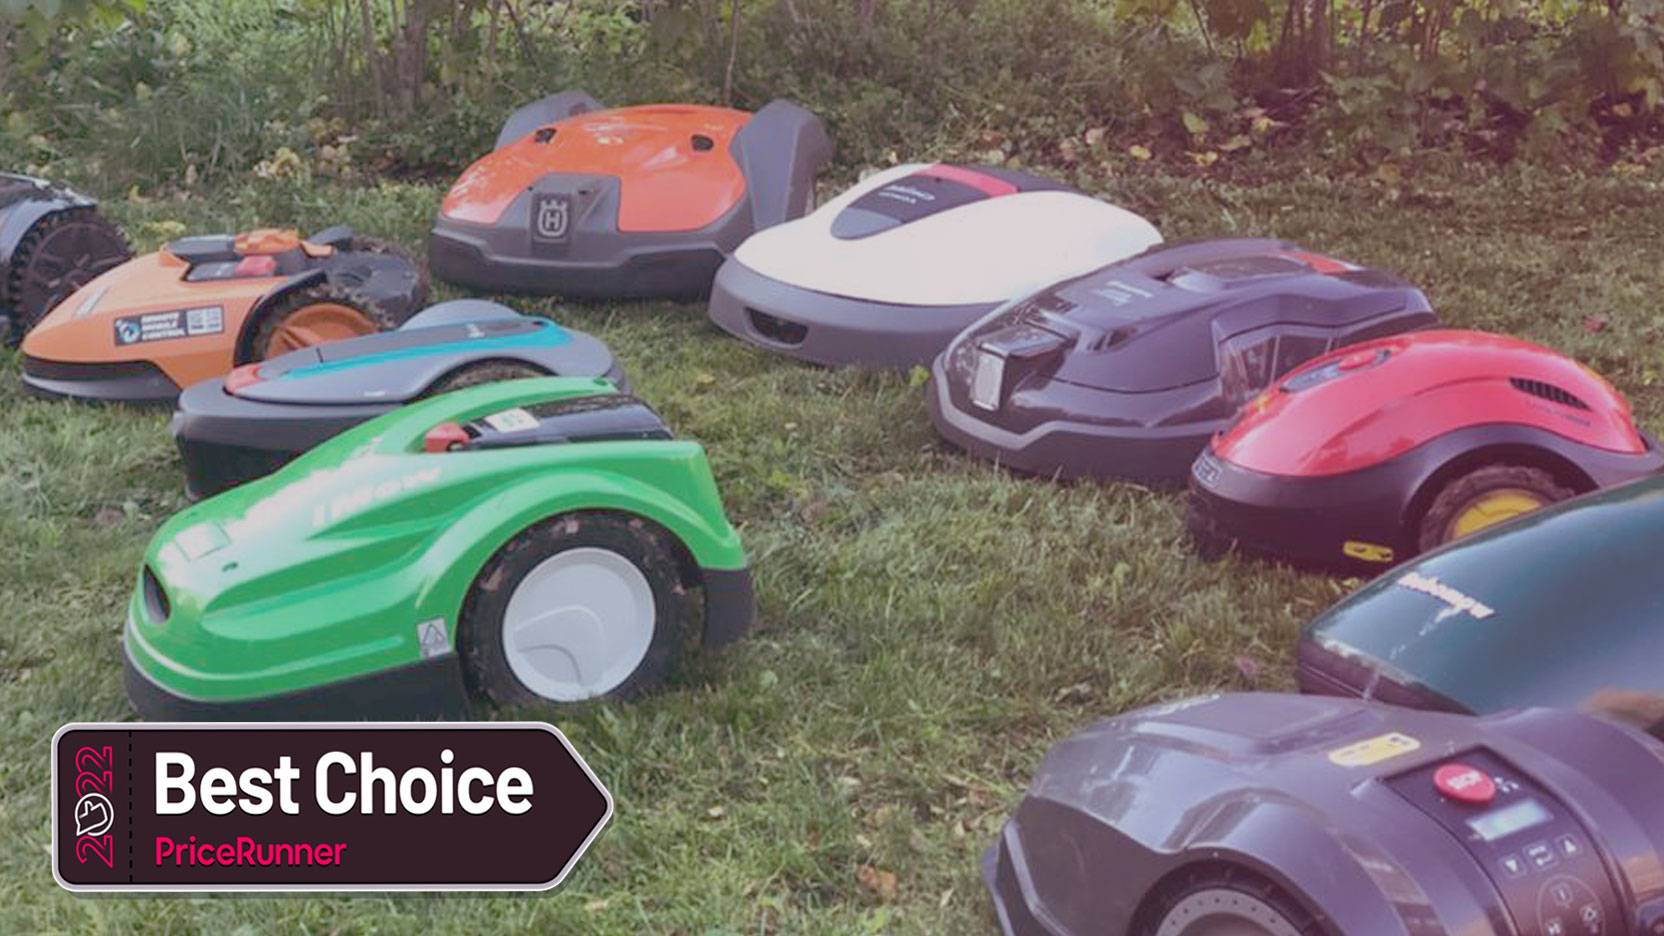 Top 24 Robotic lawn of → Reviewed & Ranked